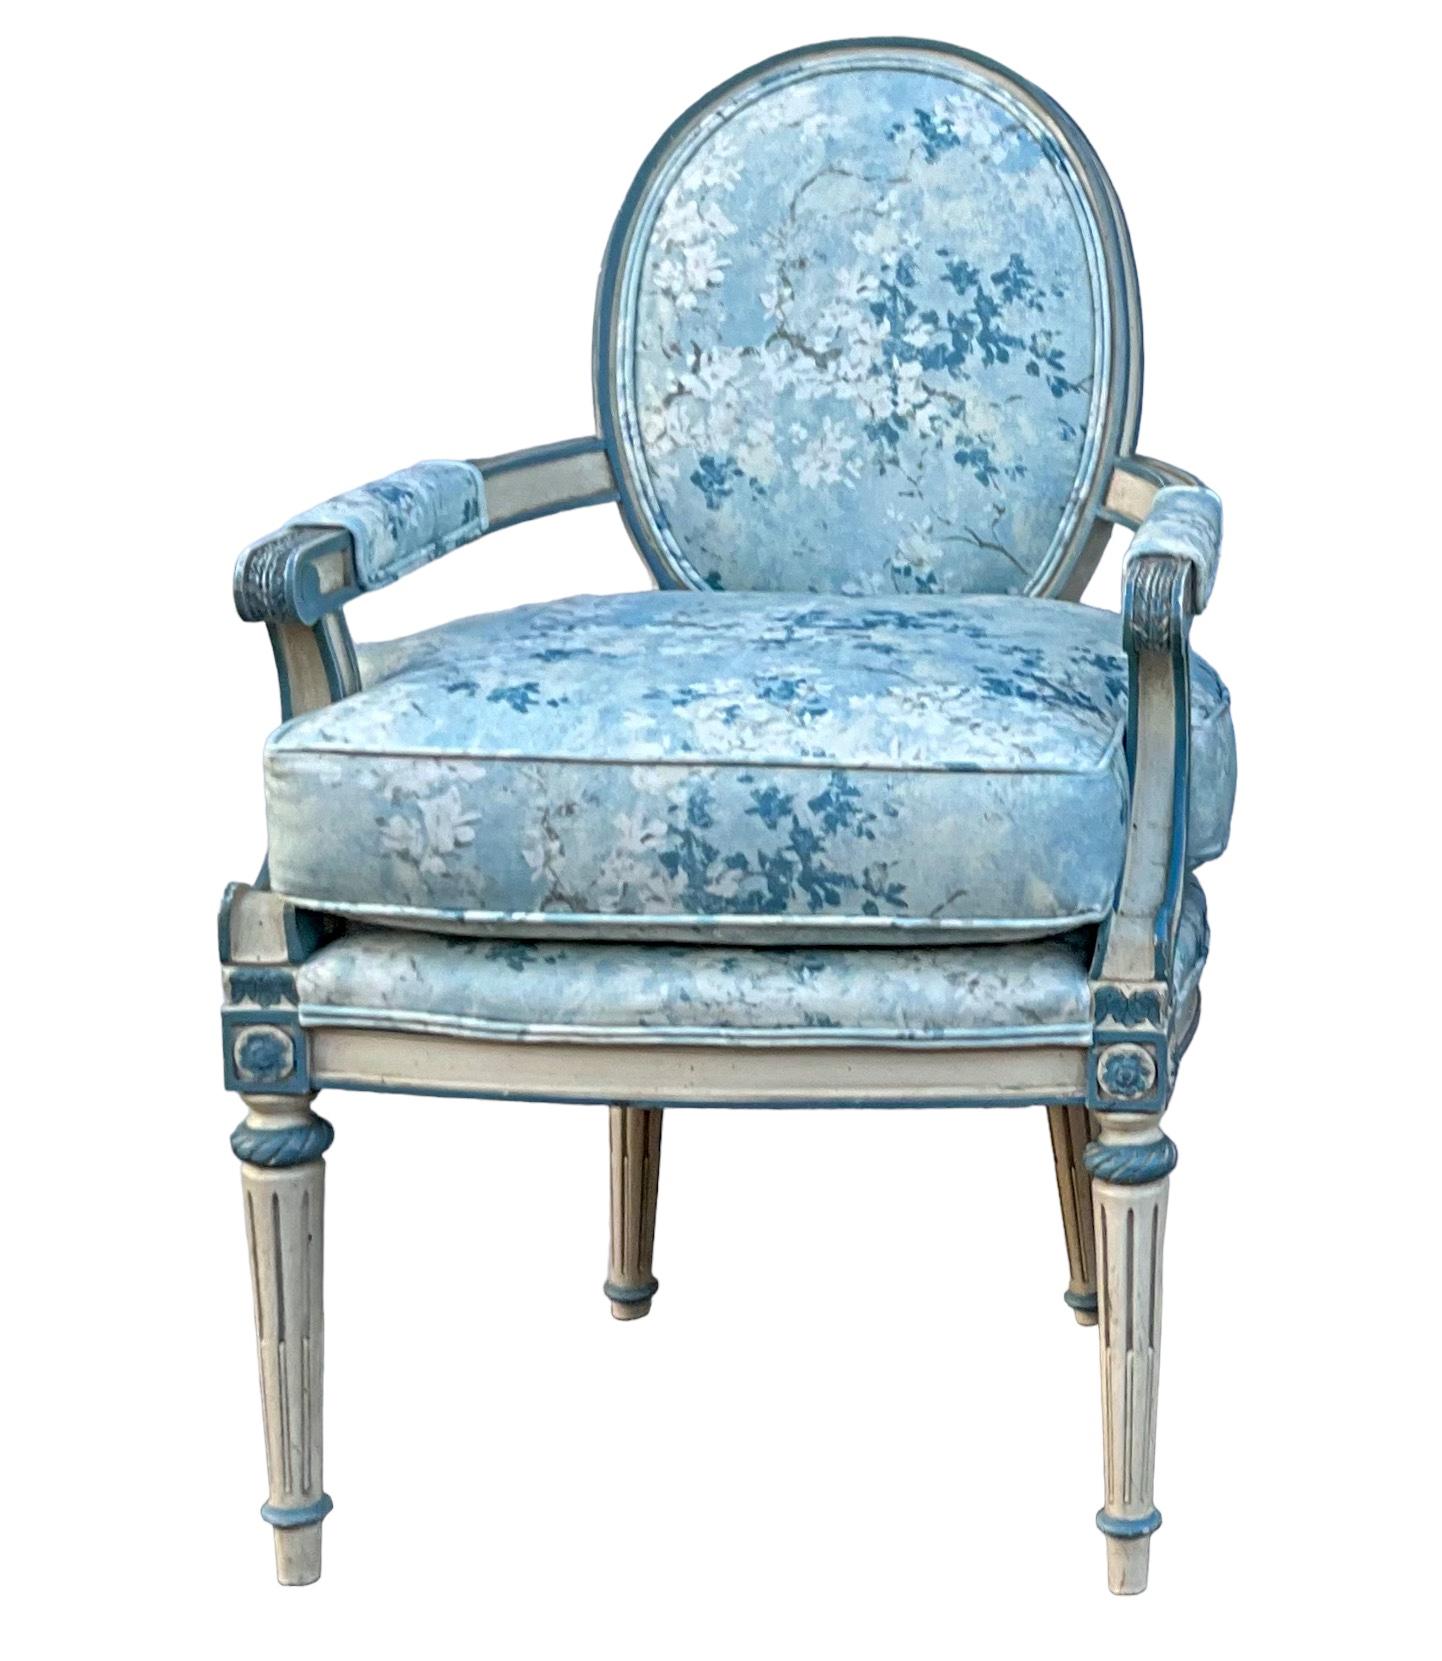 French Louis XVI Style Painted Blue Bergere Chairs In Floral Upholstery- Pair For Sale 3